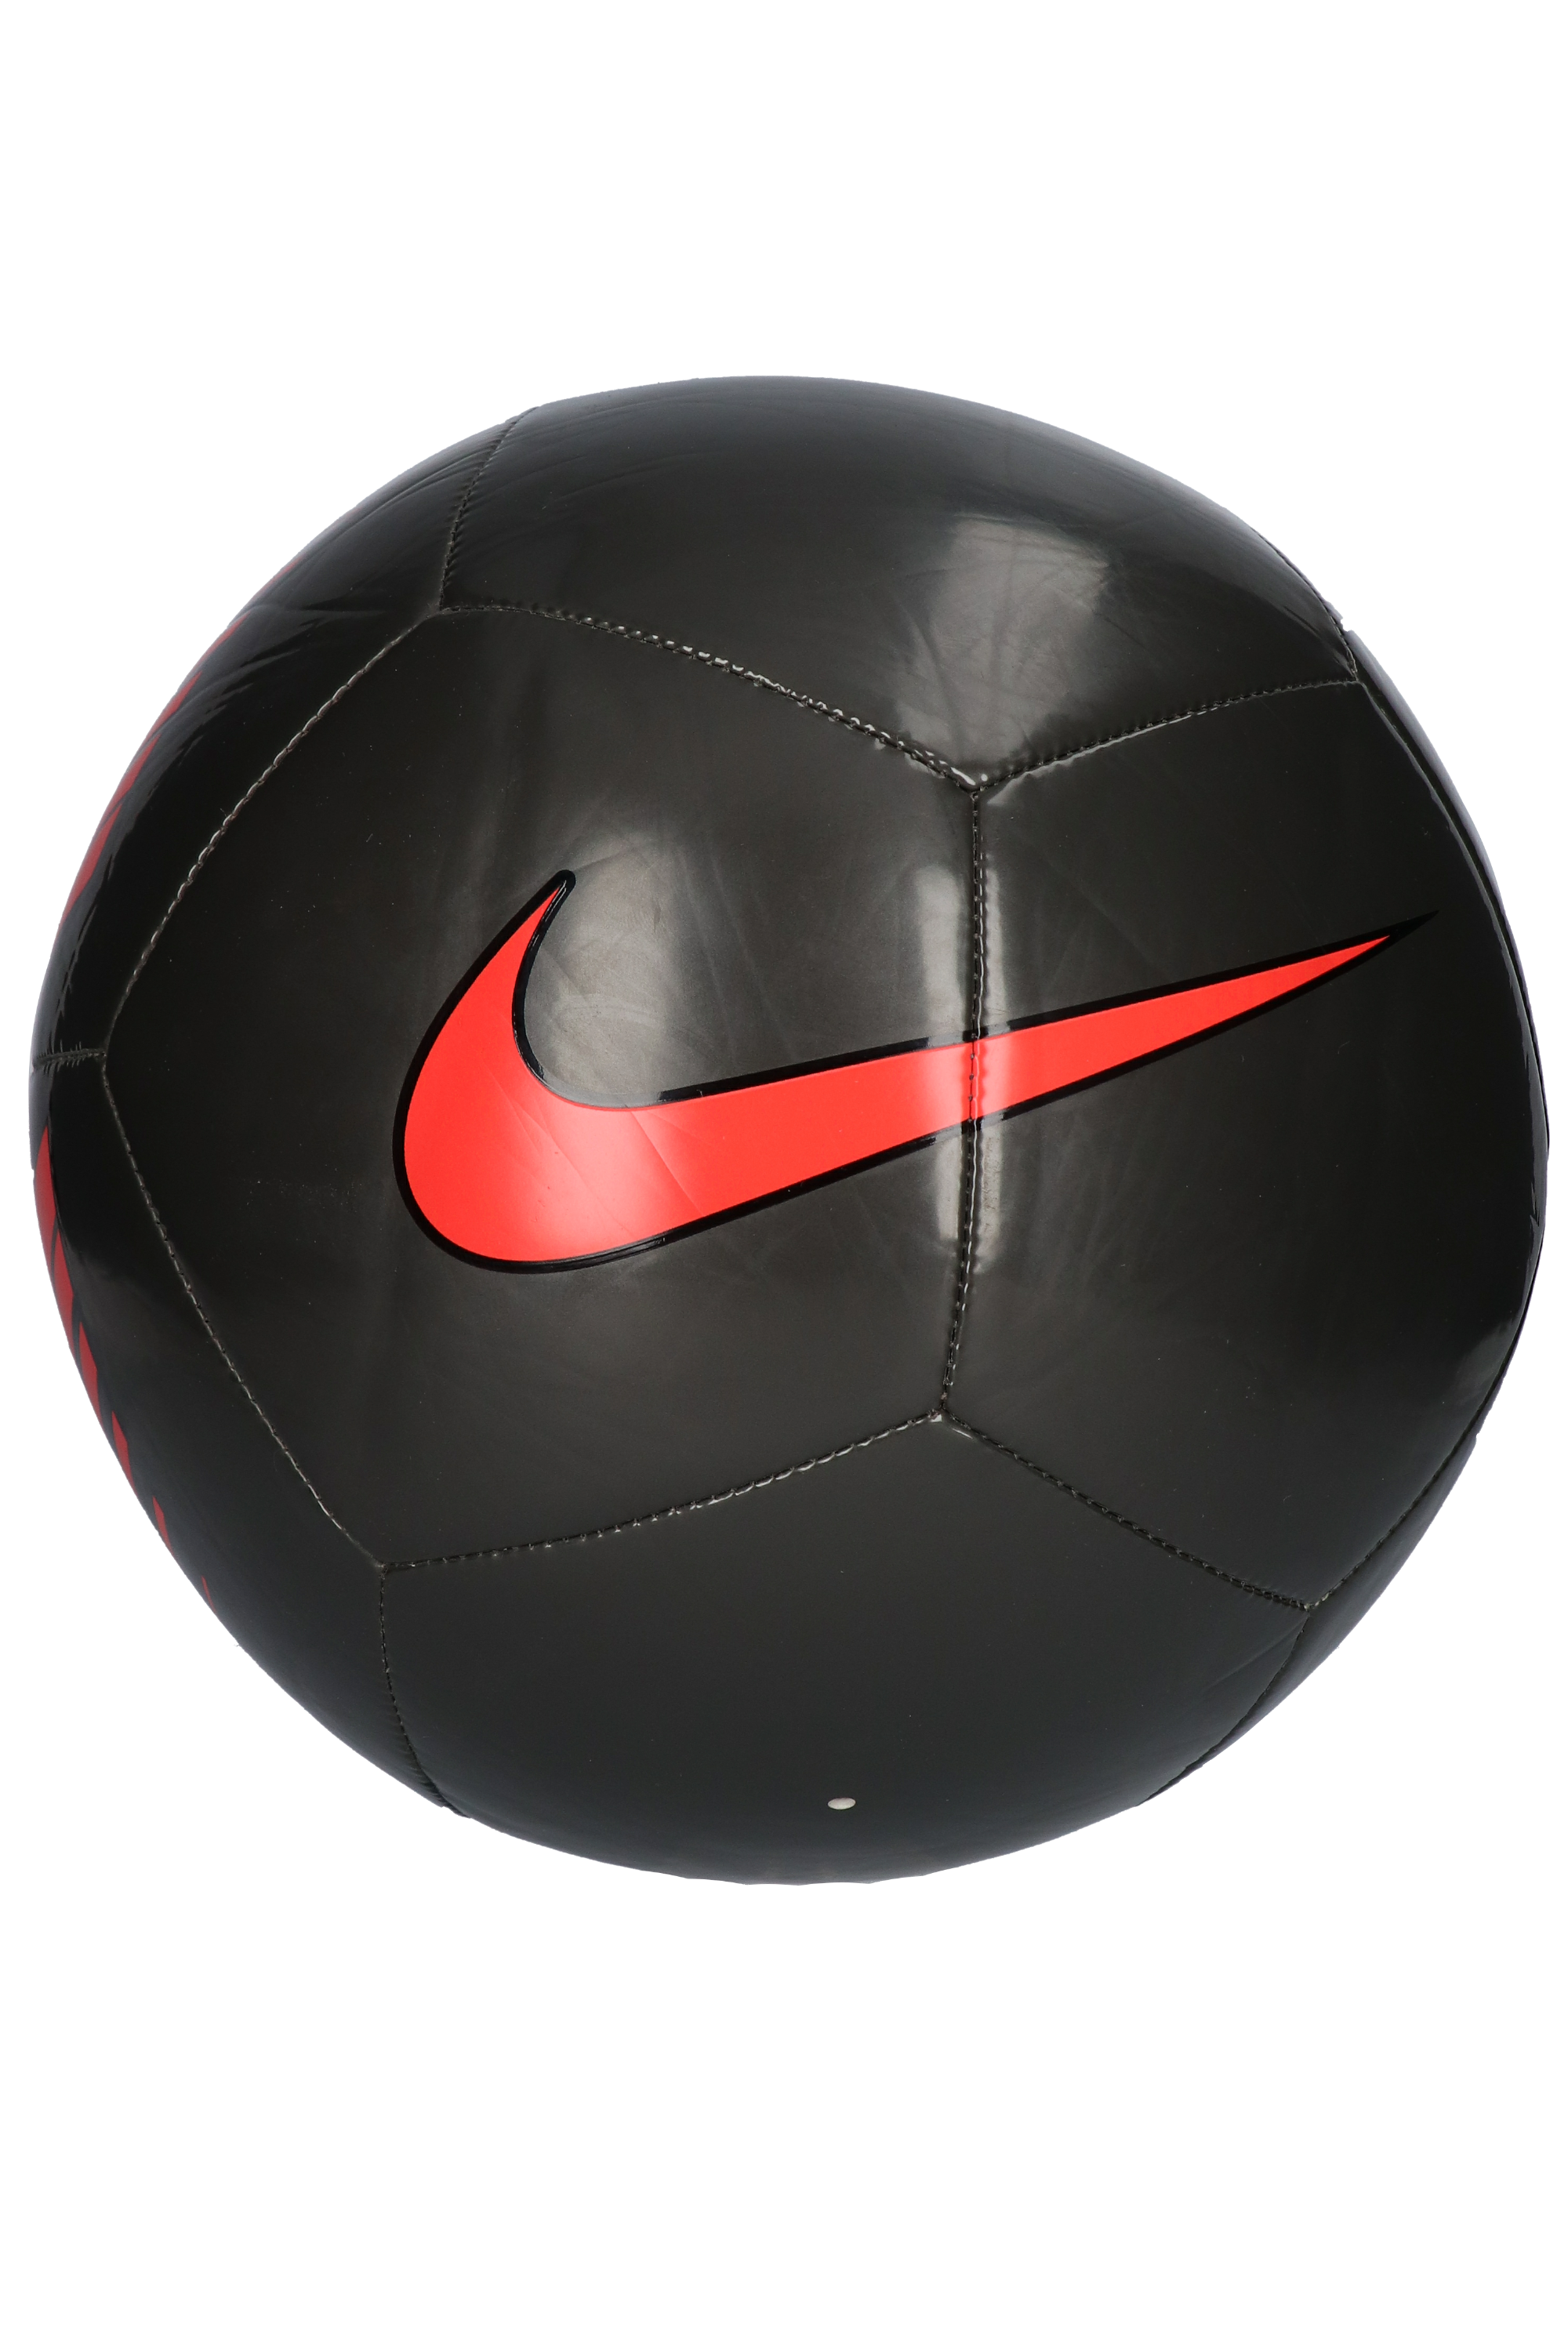 nike pitch training soccer ball review